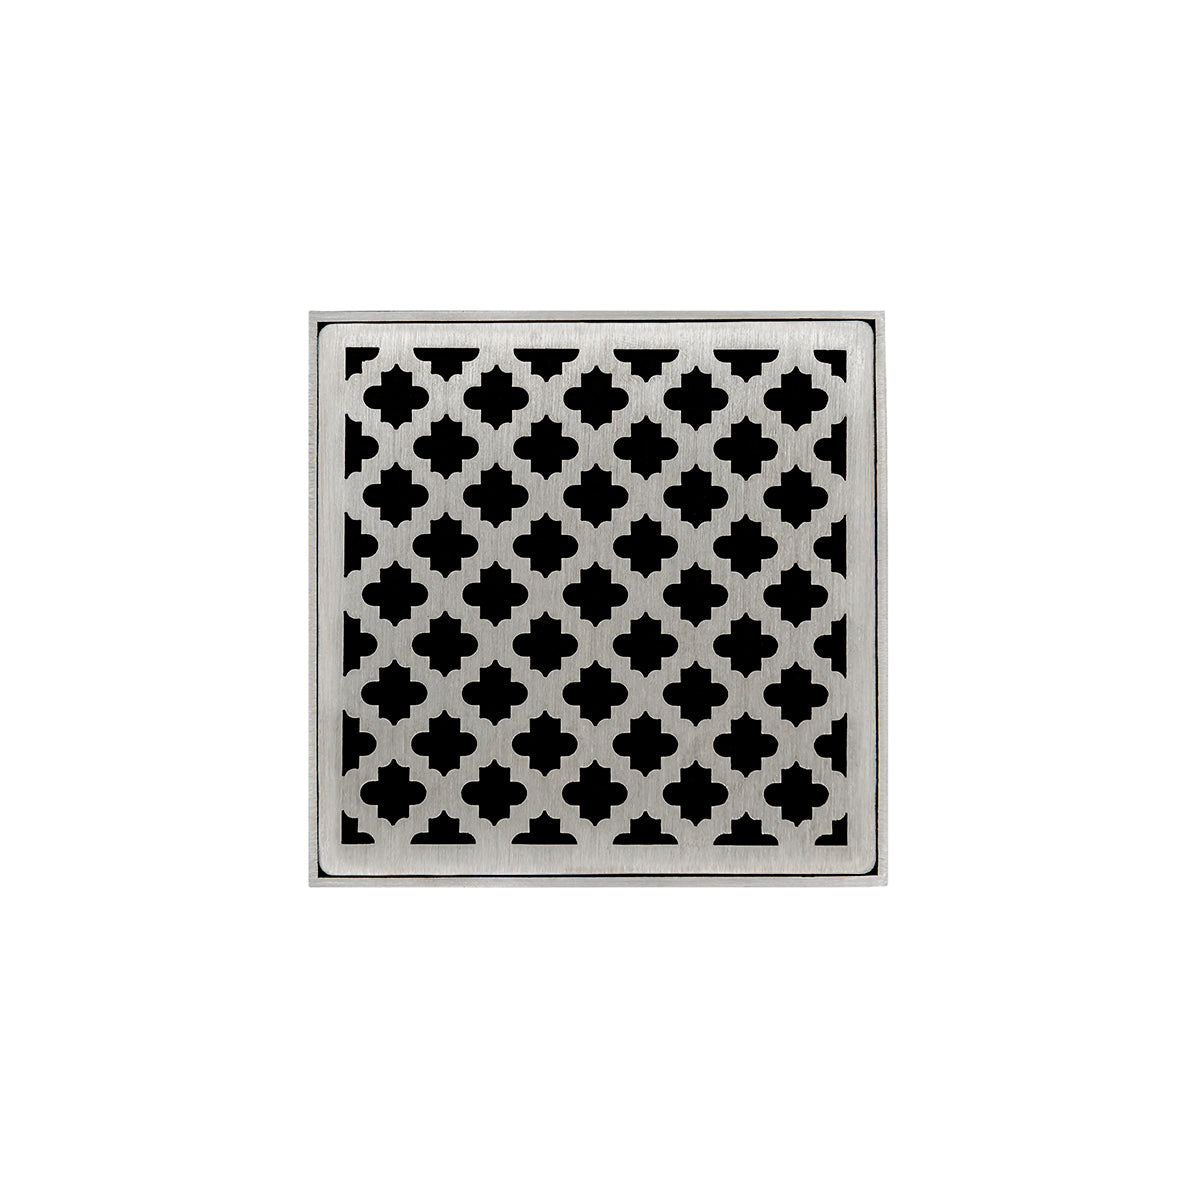 Infinity Drain 4" x 4" MD 4 Premium Center Drain Kit with Moor Pattern Decorative Plate with Cast Iron Drain Body for Hot Mop, 2" Outlet